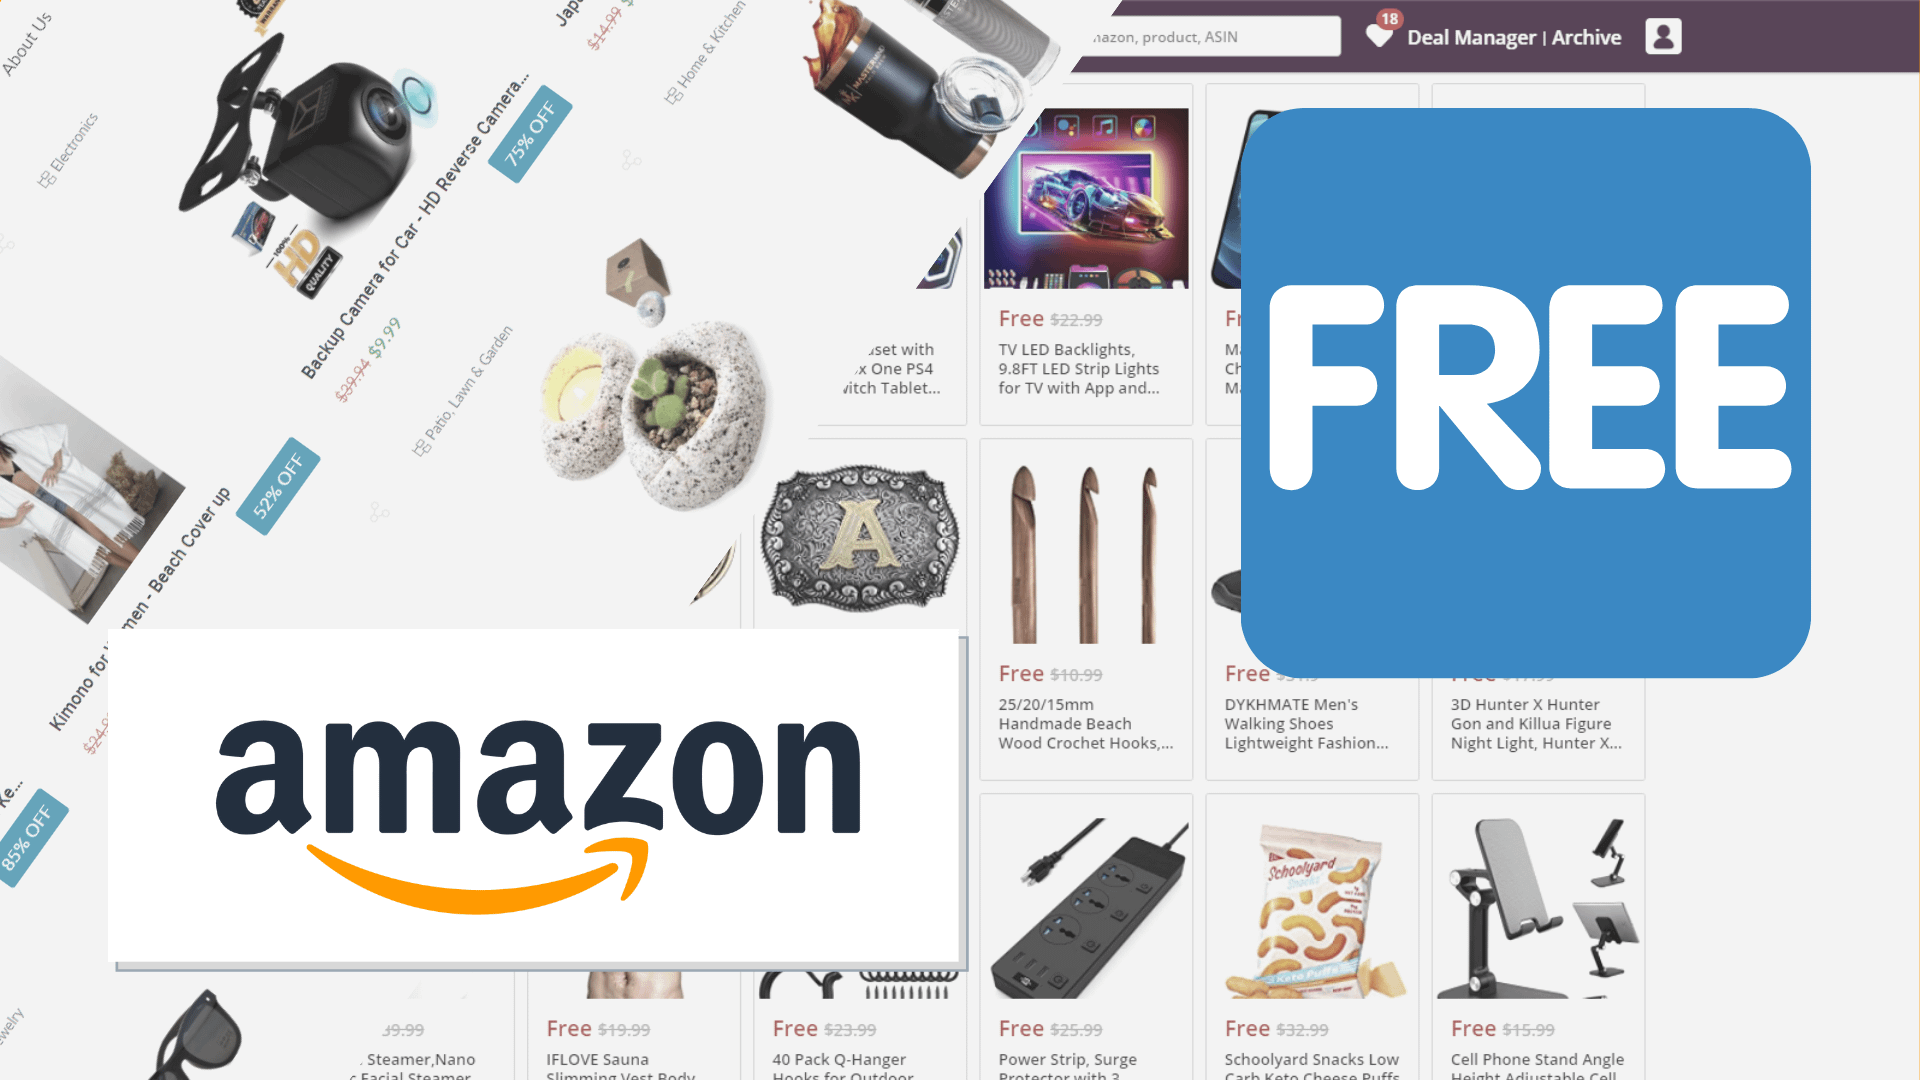 How to ACTUALLY get free Amazon products (yes, really)